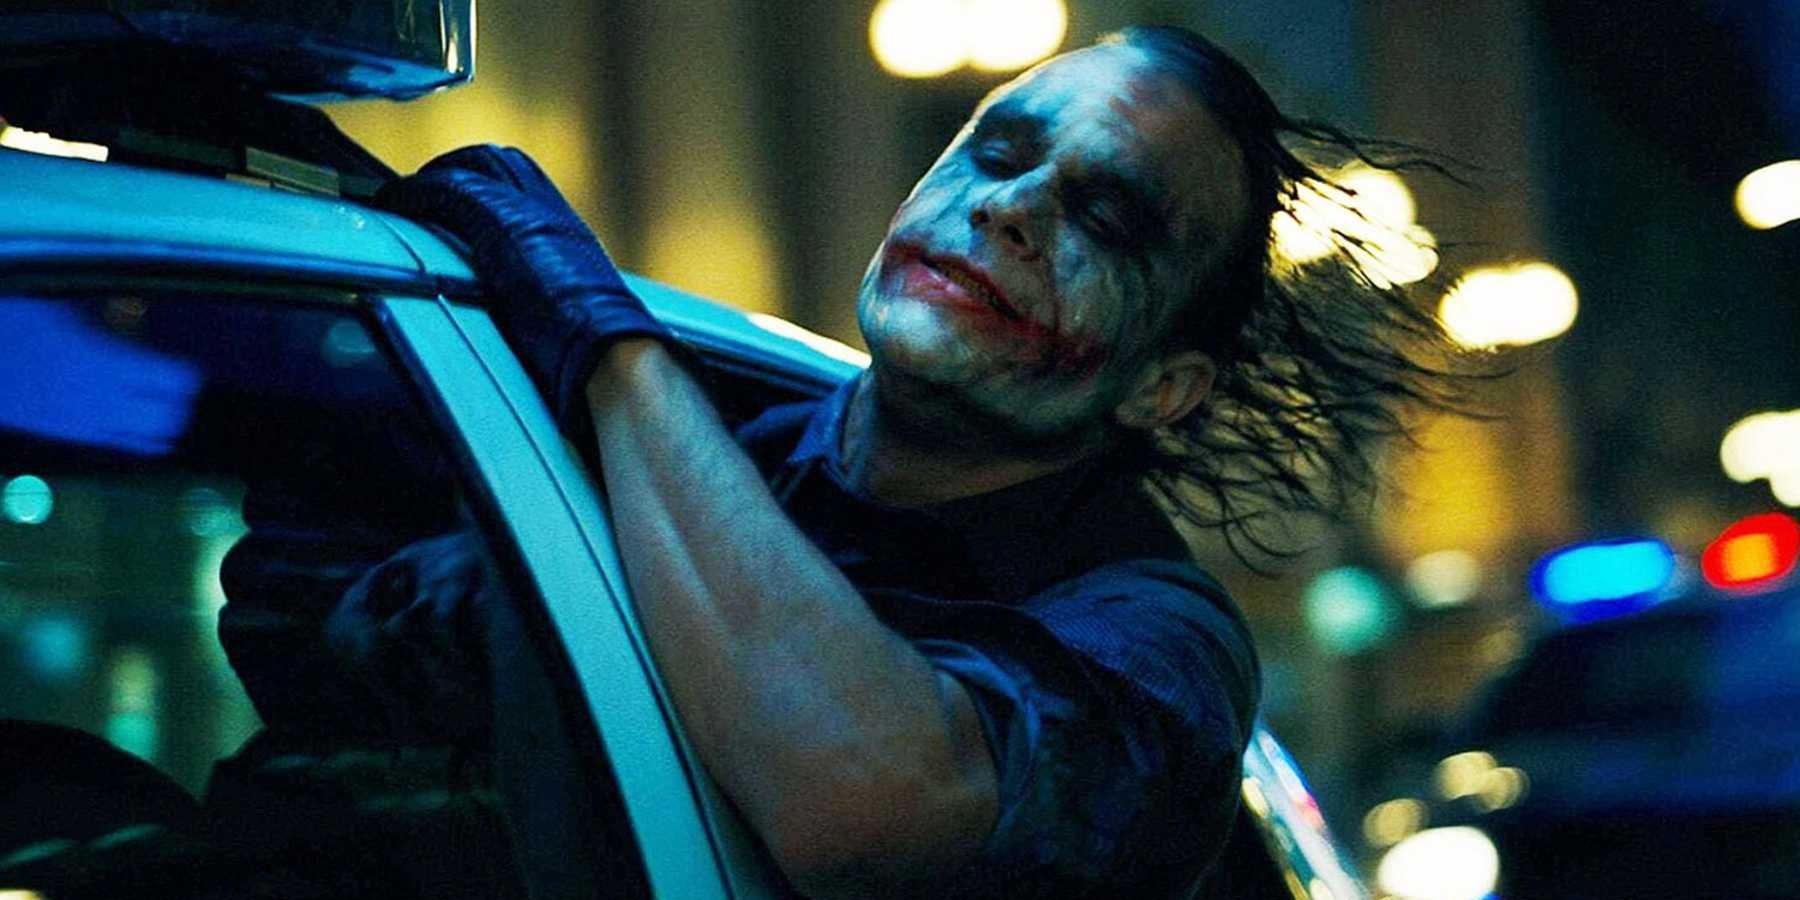 Heath Ledger as The Joker leaning out of a car window.